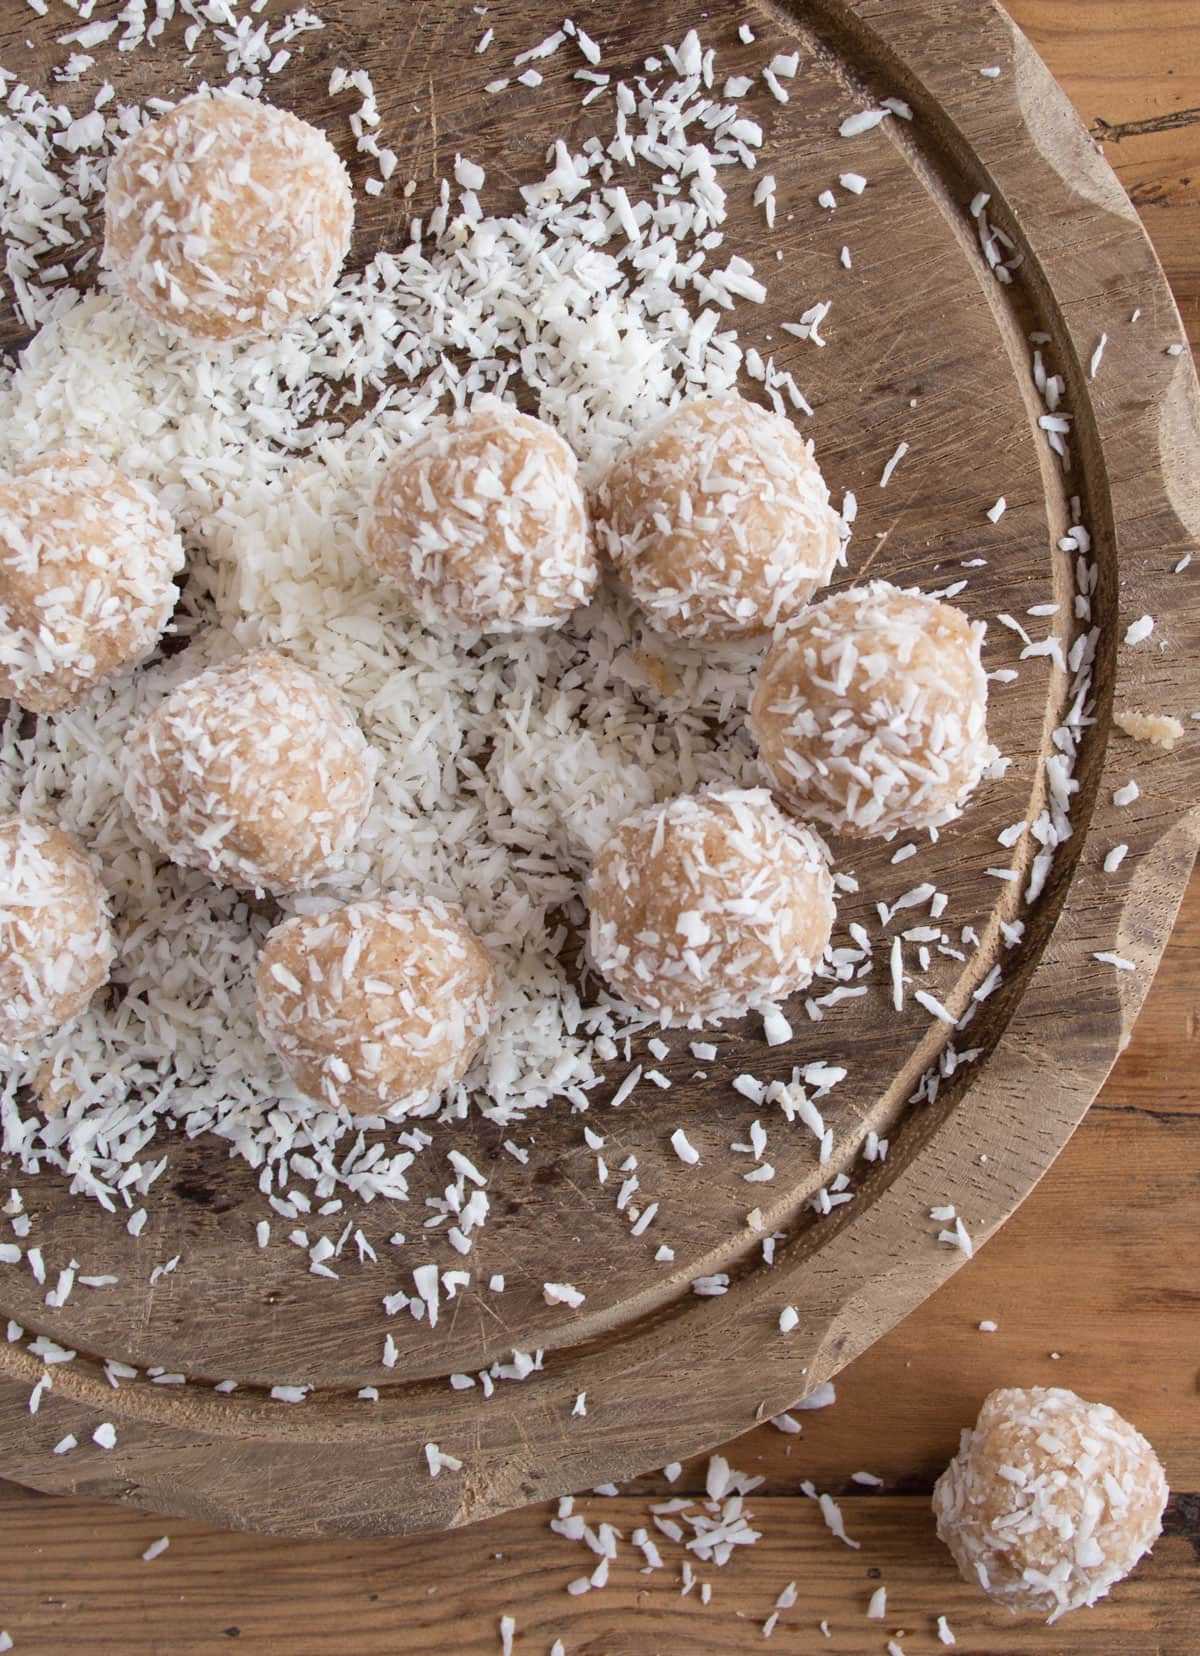 Bliss ball coated in desiccated coconut on a wooden board.